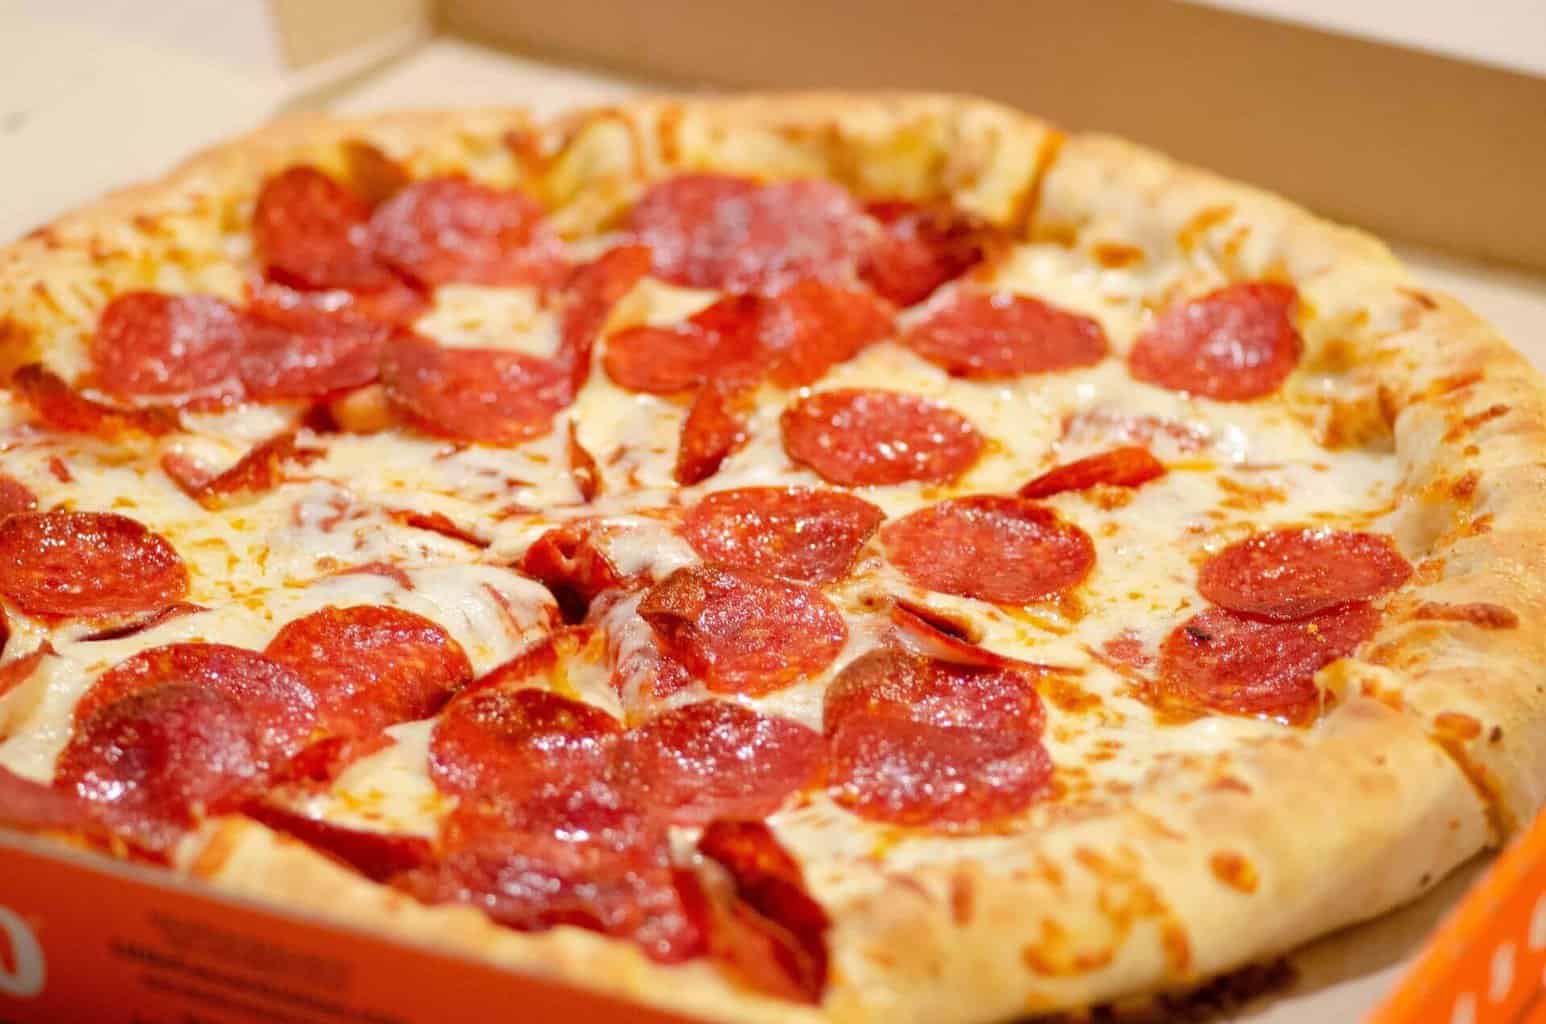 Pepperoni pizza in a box